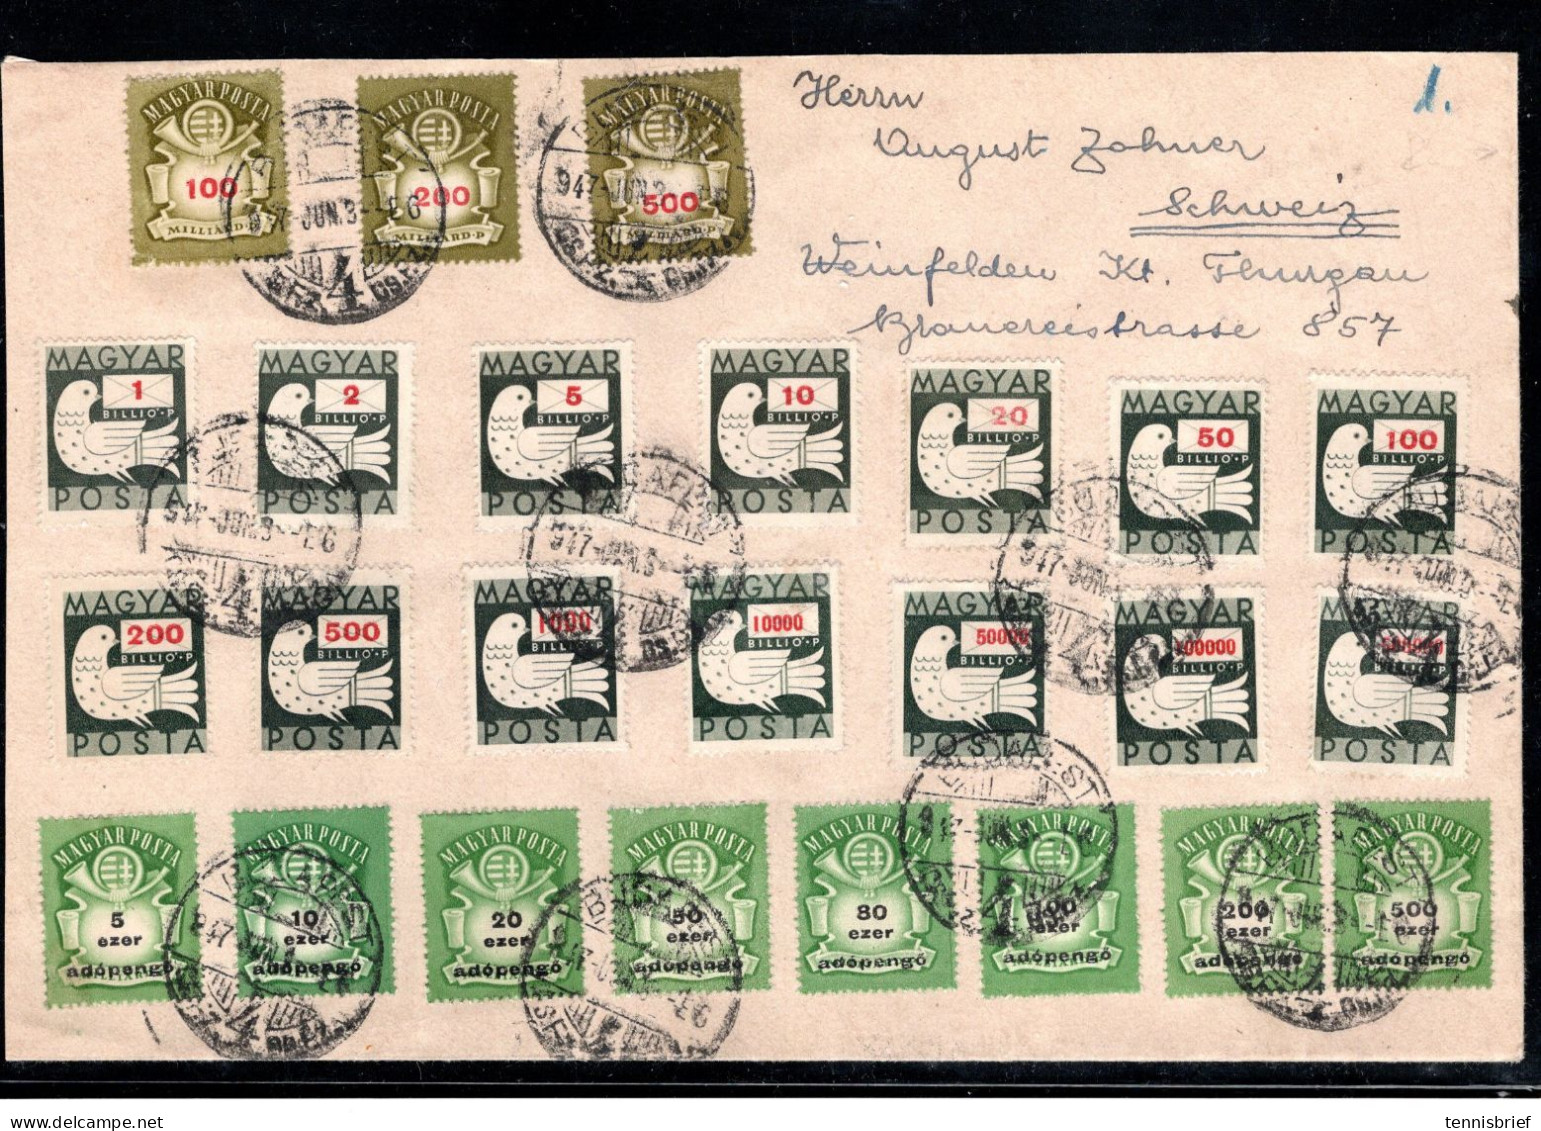 1947 , Inflation Cover , Set Franking , High Values , Cover To Switzerland , Rare On Cover !! # 1495 - Briefe U. Dokumente